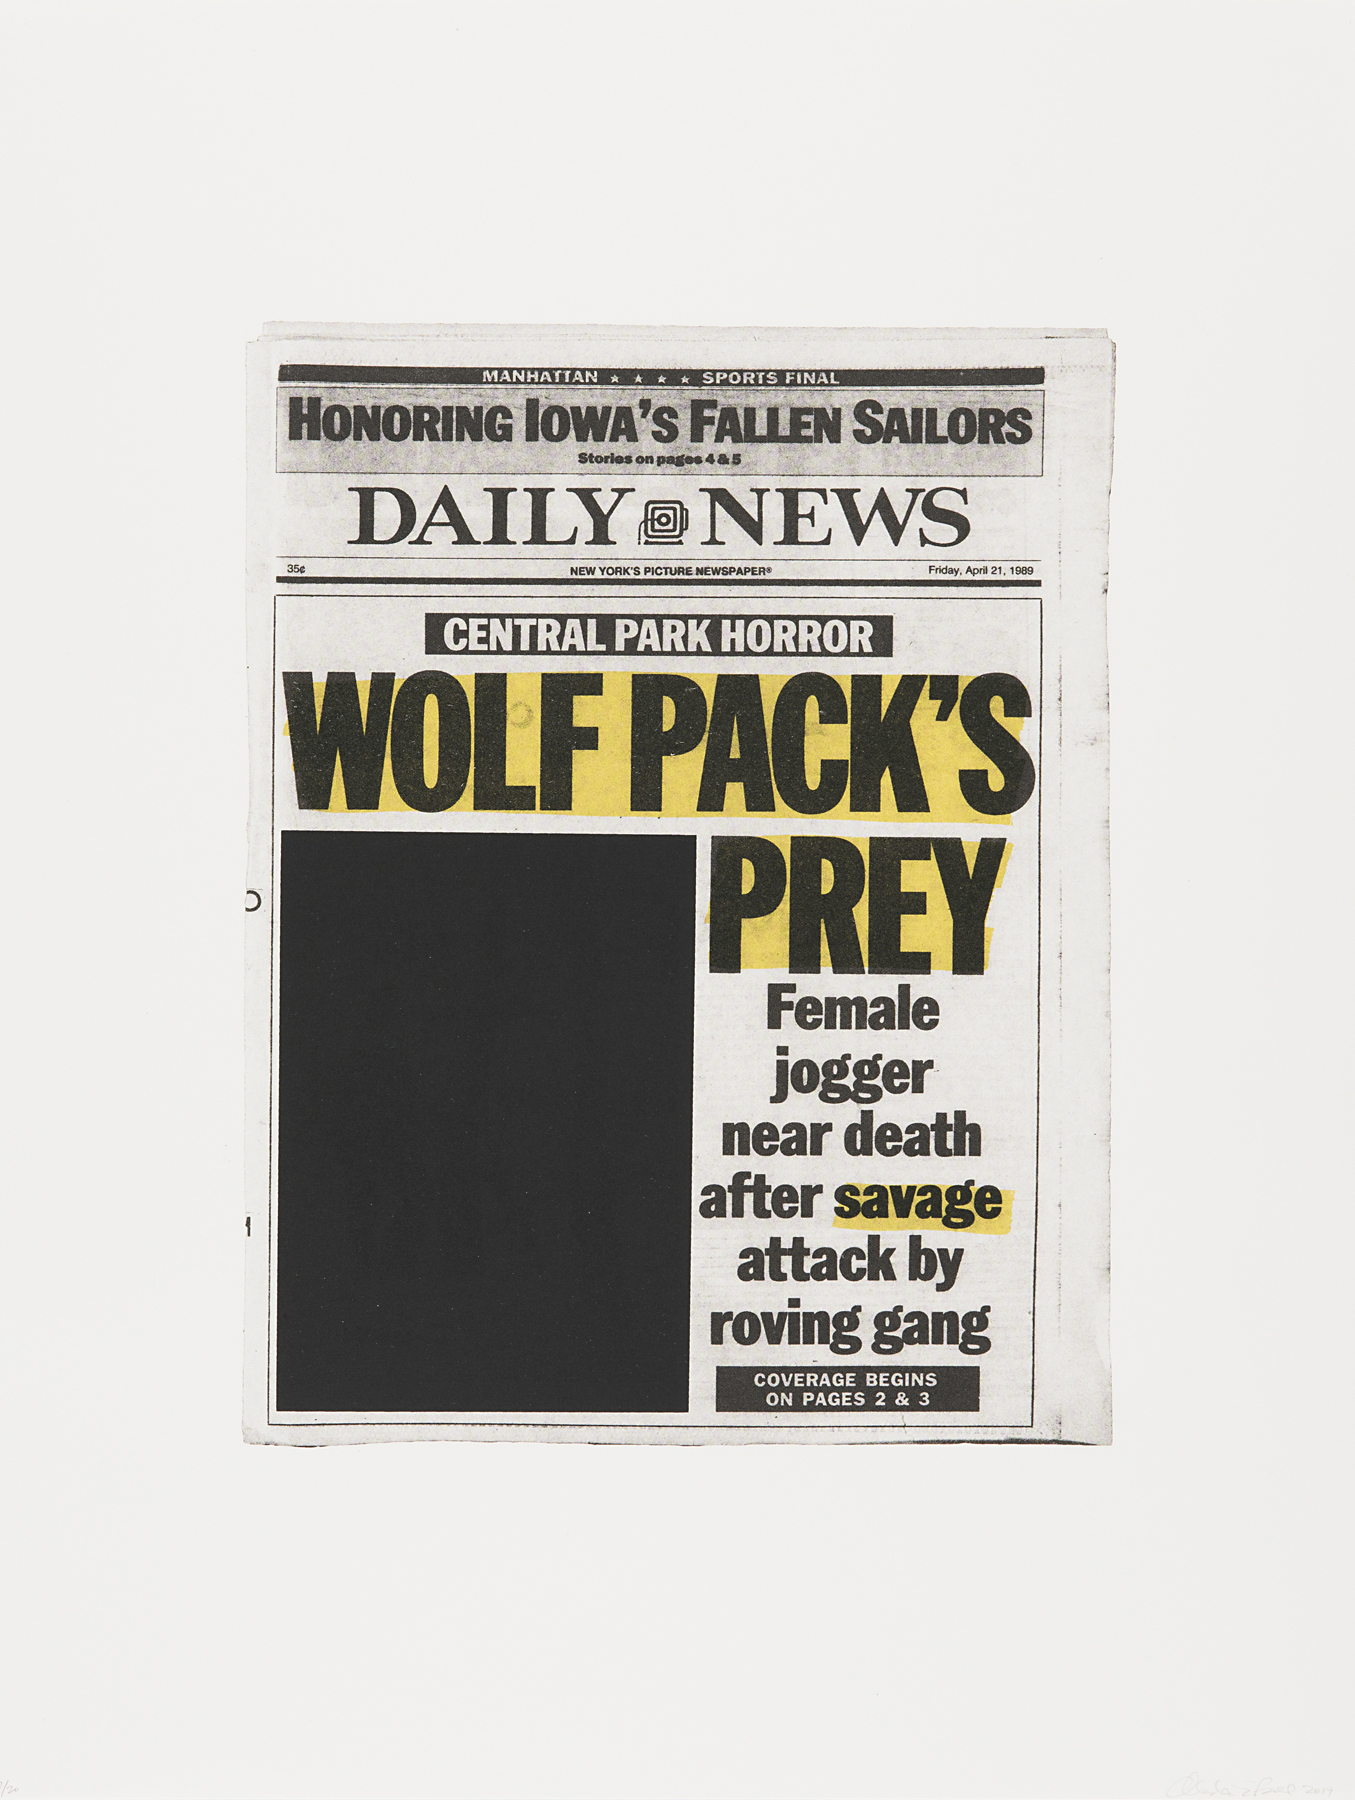 The front page of the New York Daily News from Friday, April 21, 1989. The headline reads “WOLF PACK’S PREY” and is highlighted in yellow. The subhead reads “Female jogger near death after savage attack by roving gang” with the word savage highlighted in yellow. There is a large black box on the left side where a photo would be. 